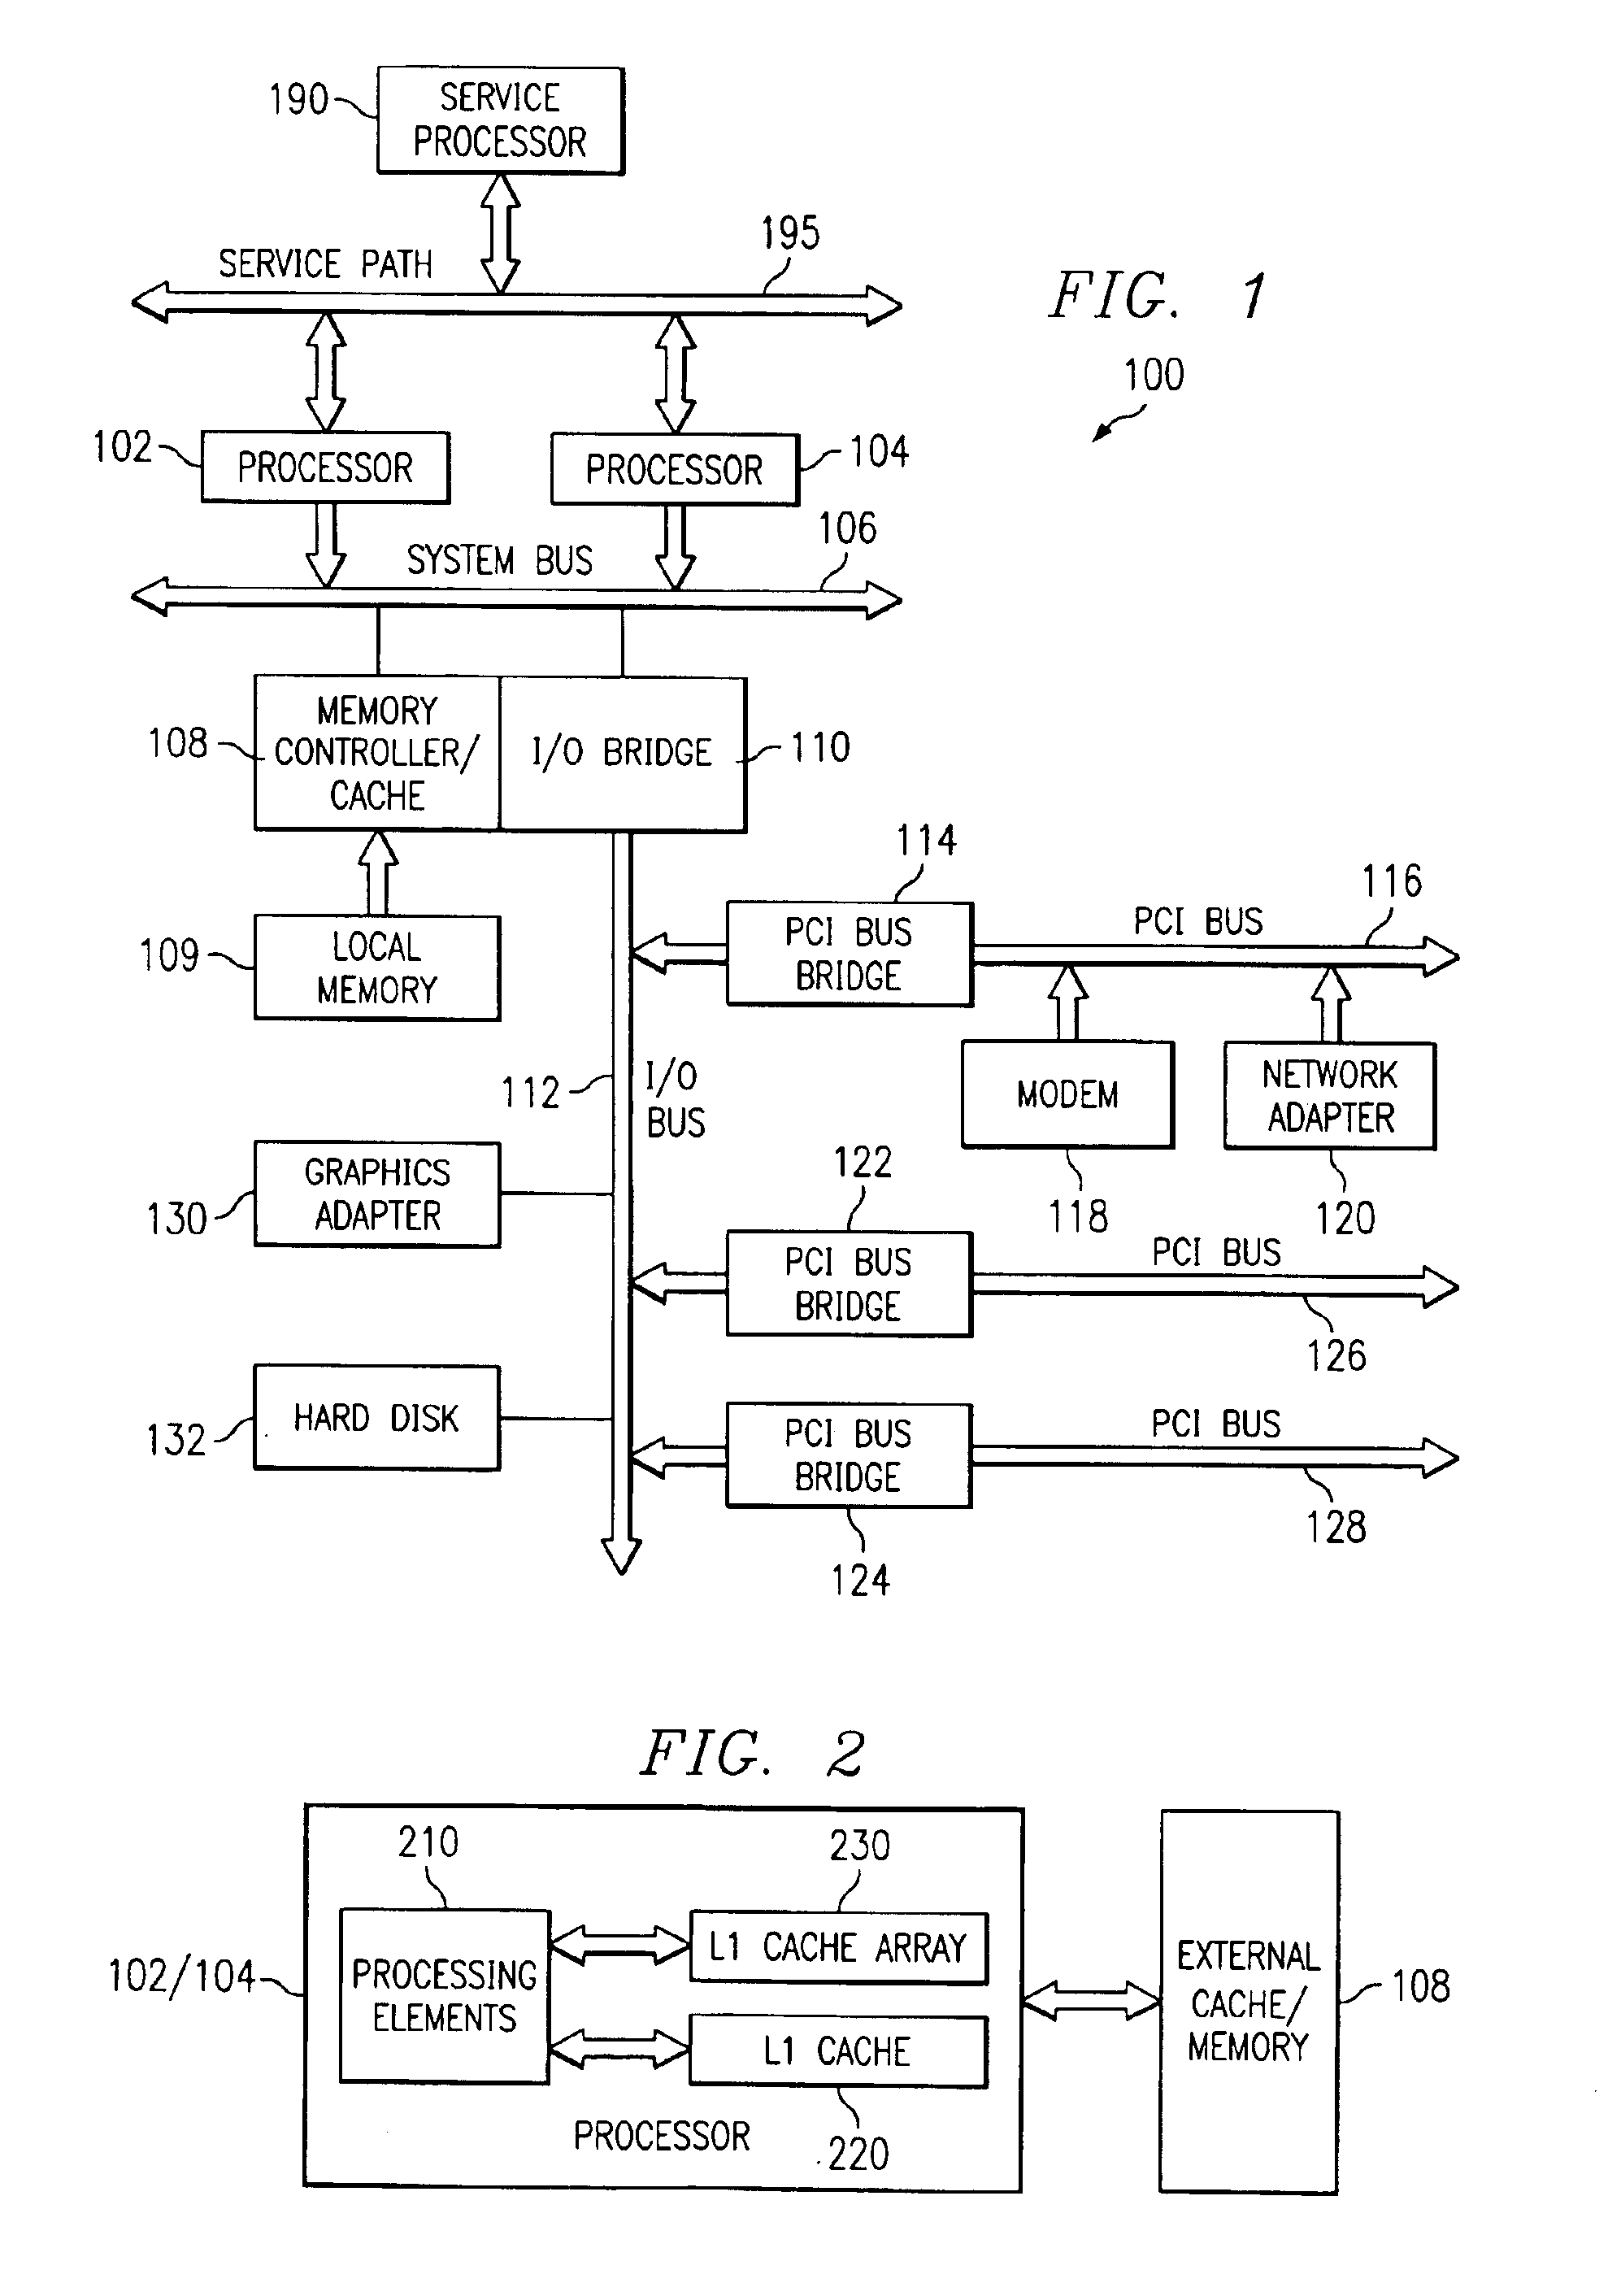 Apparatus and method of repairing a processor array for a failure detected at runtime